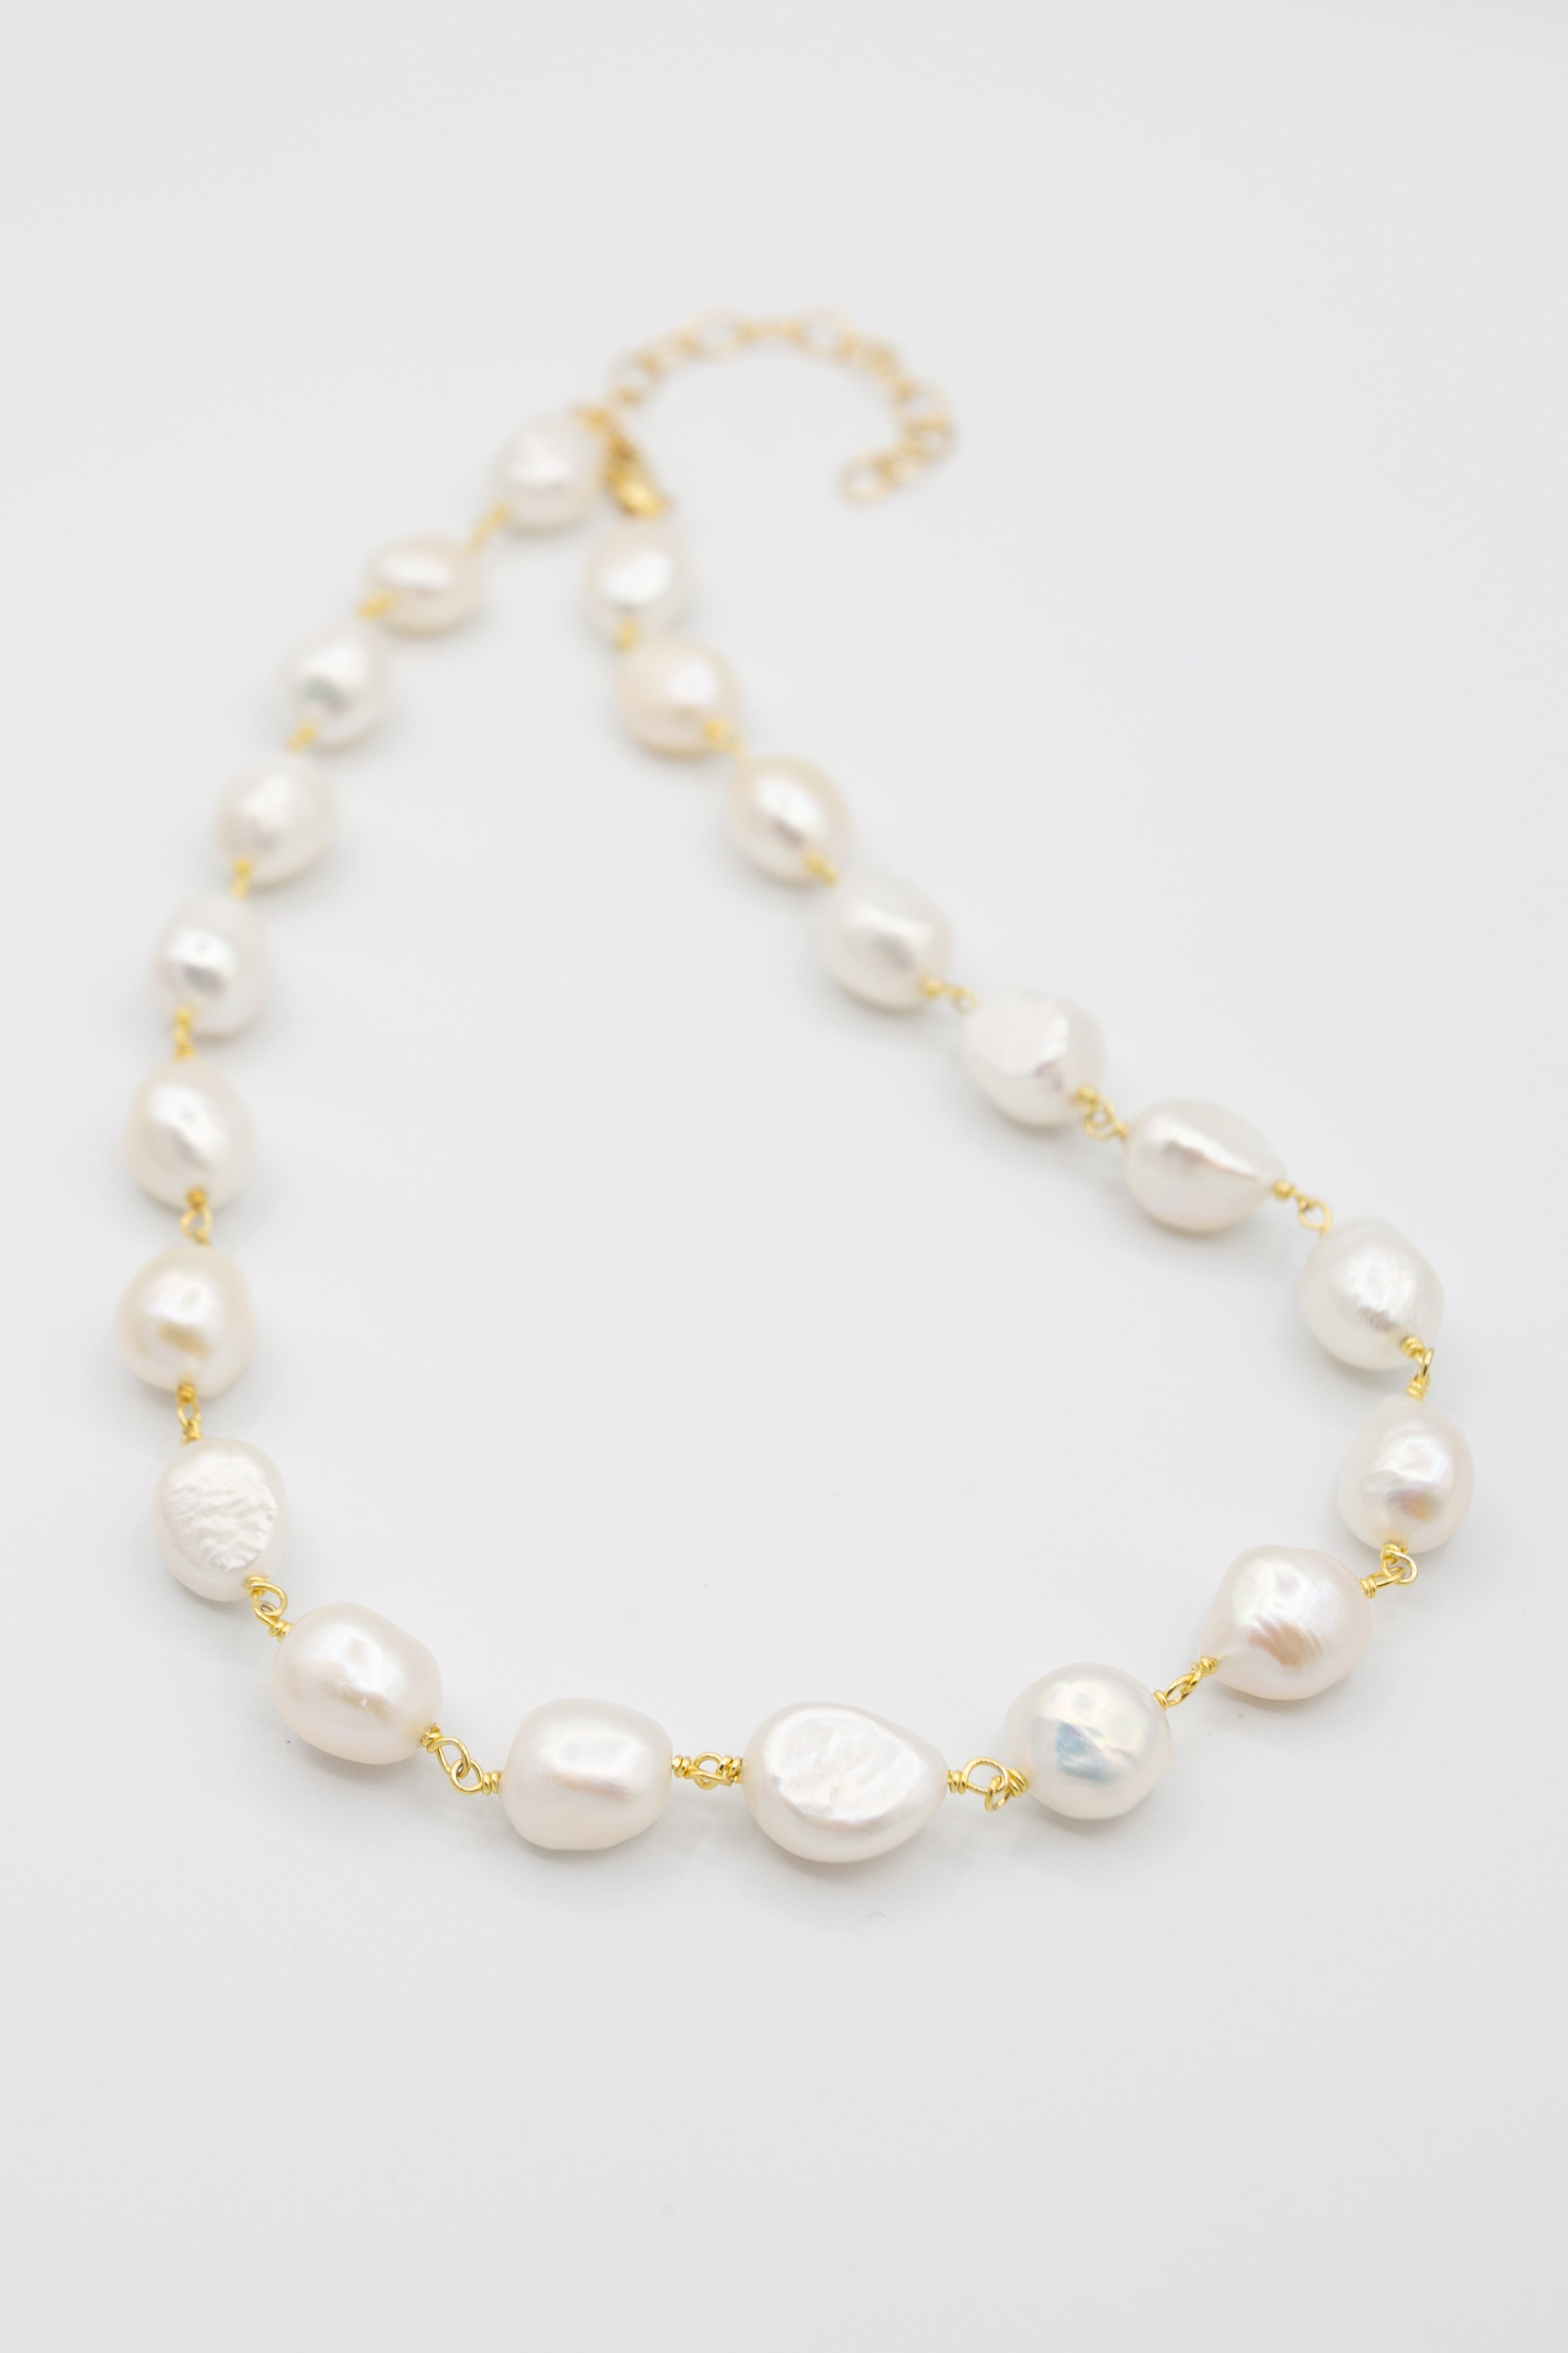 Chunky fresh water pearl necklace